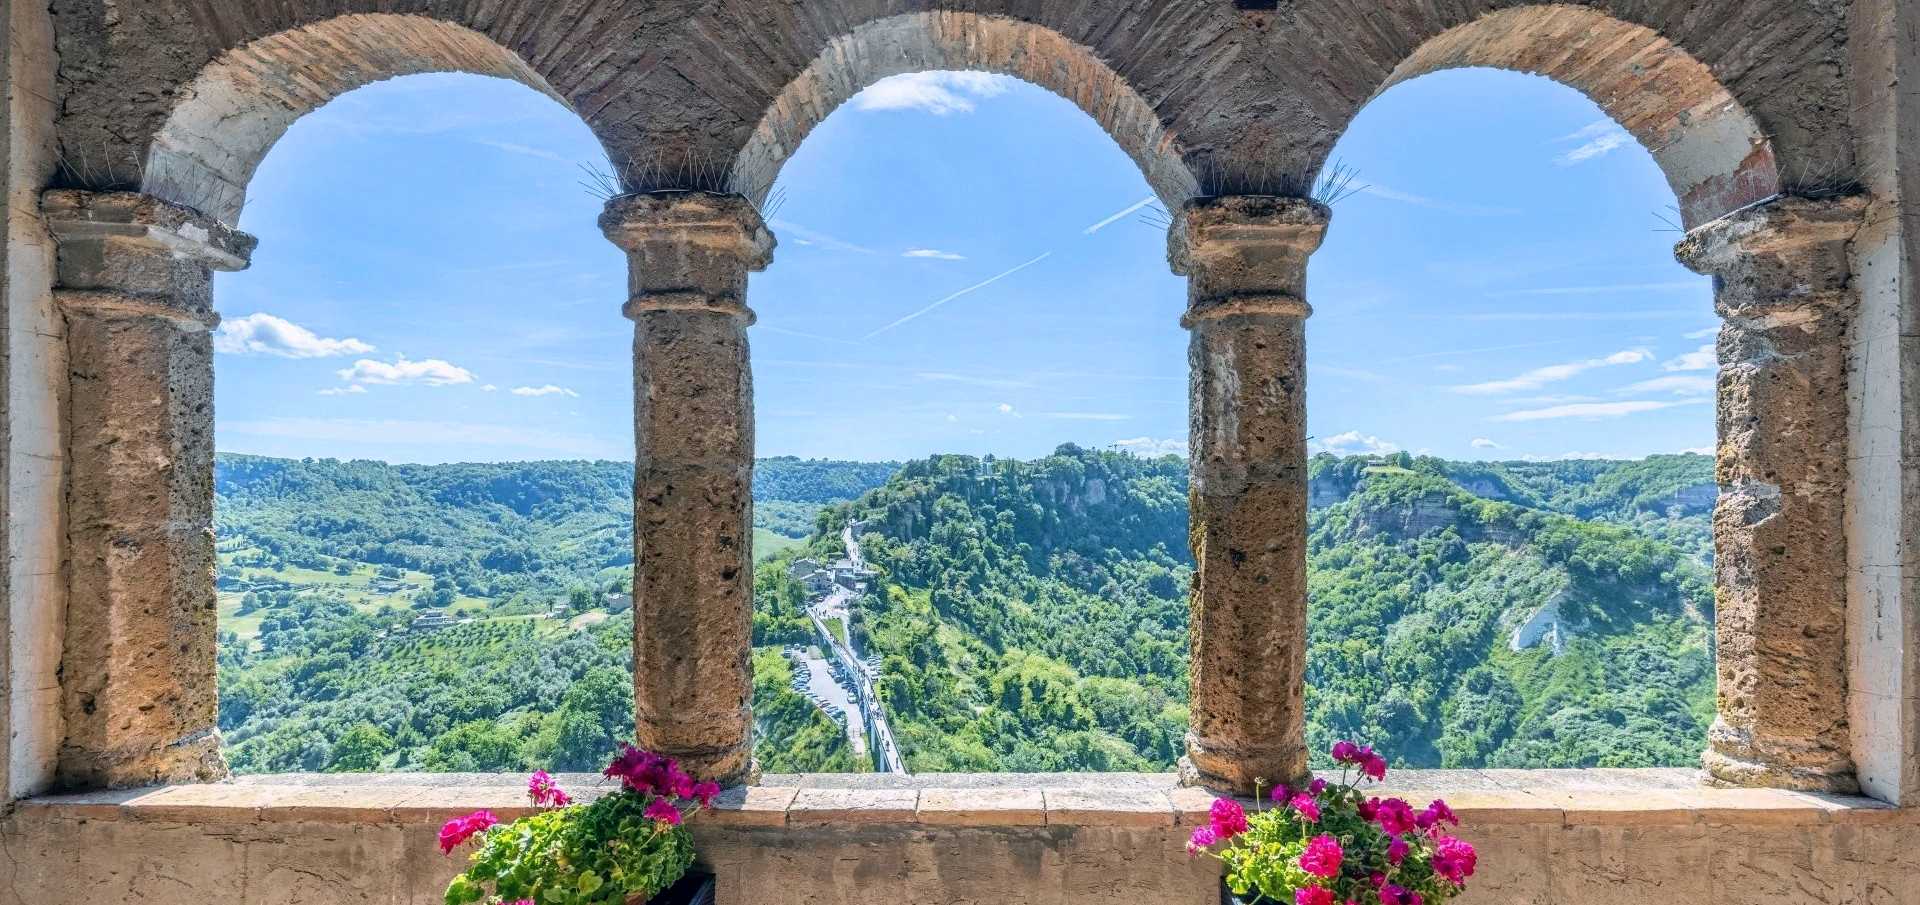 Palace for sale in central Italy